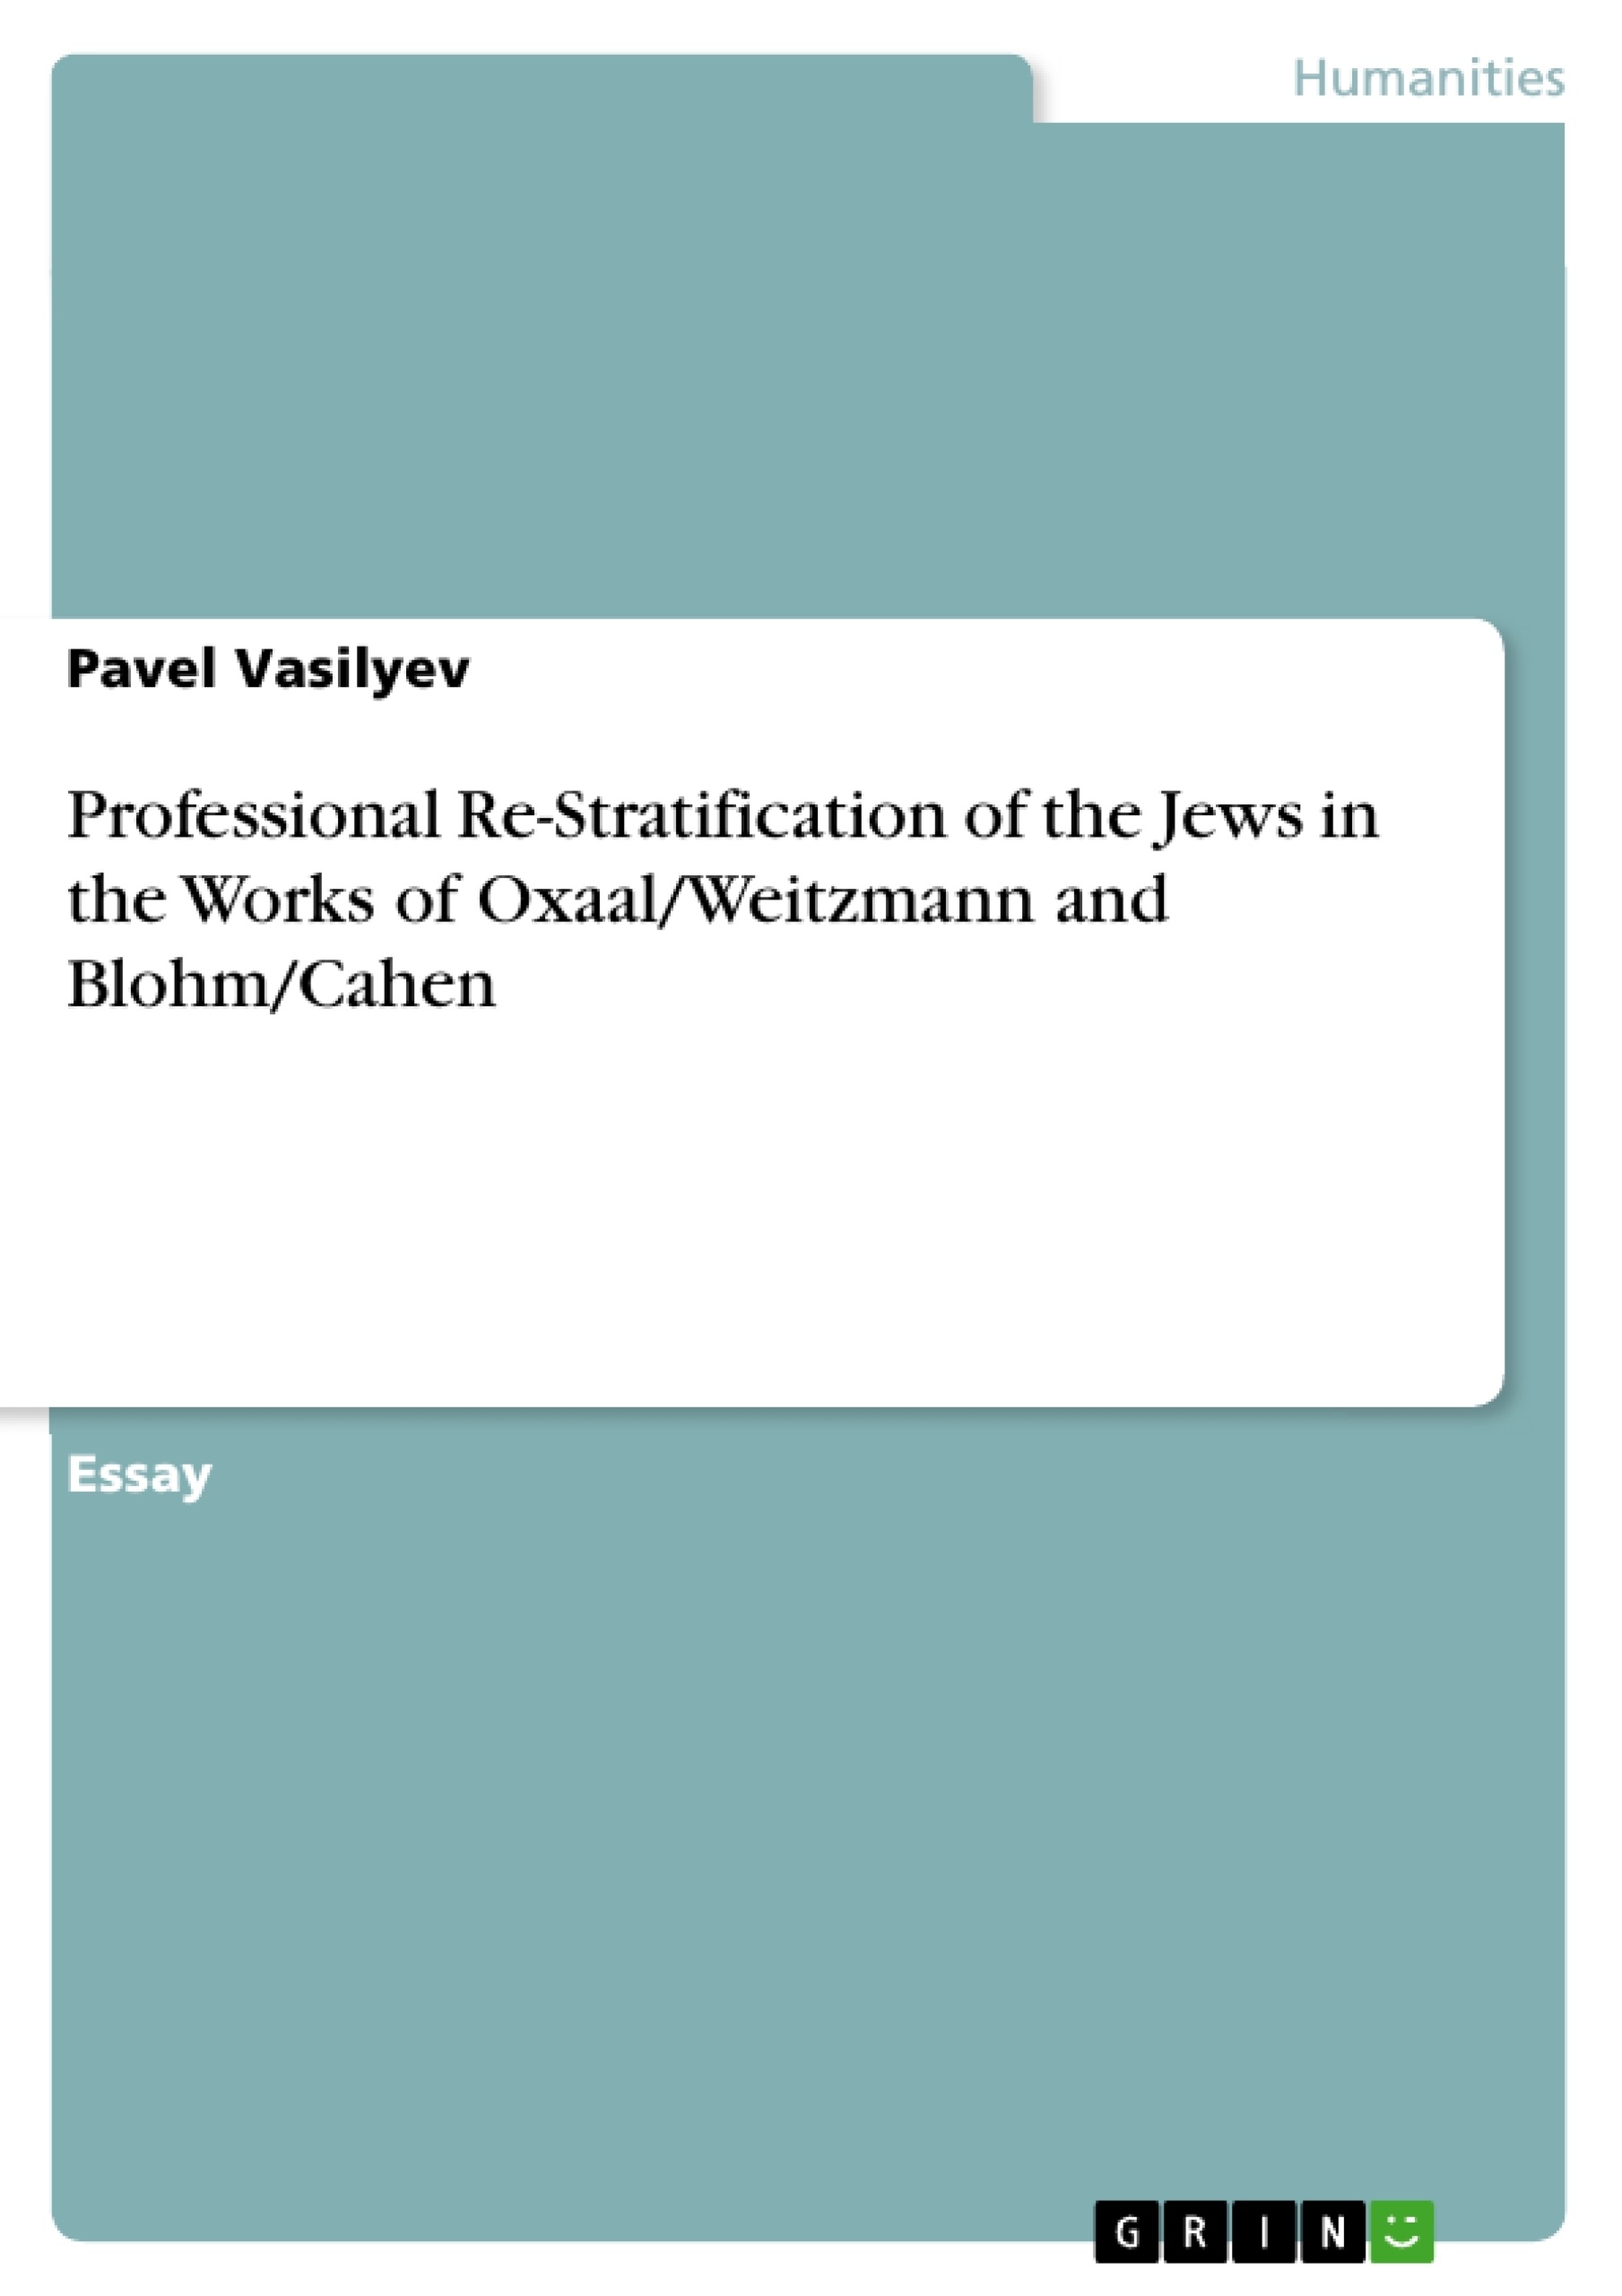 Título: Professional Re-Stratification of the Jews in the Works of Oxaal/Weitzmann and Blohm/Cahen